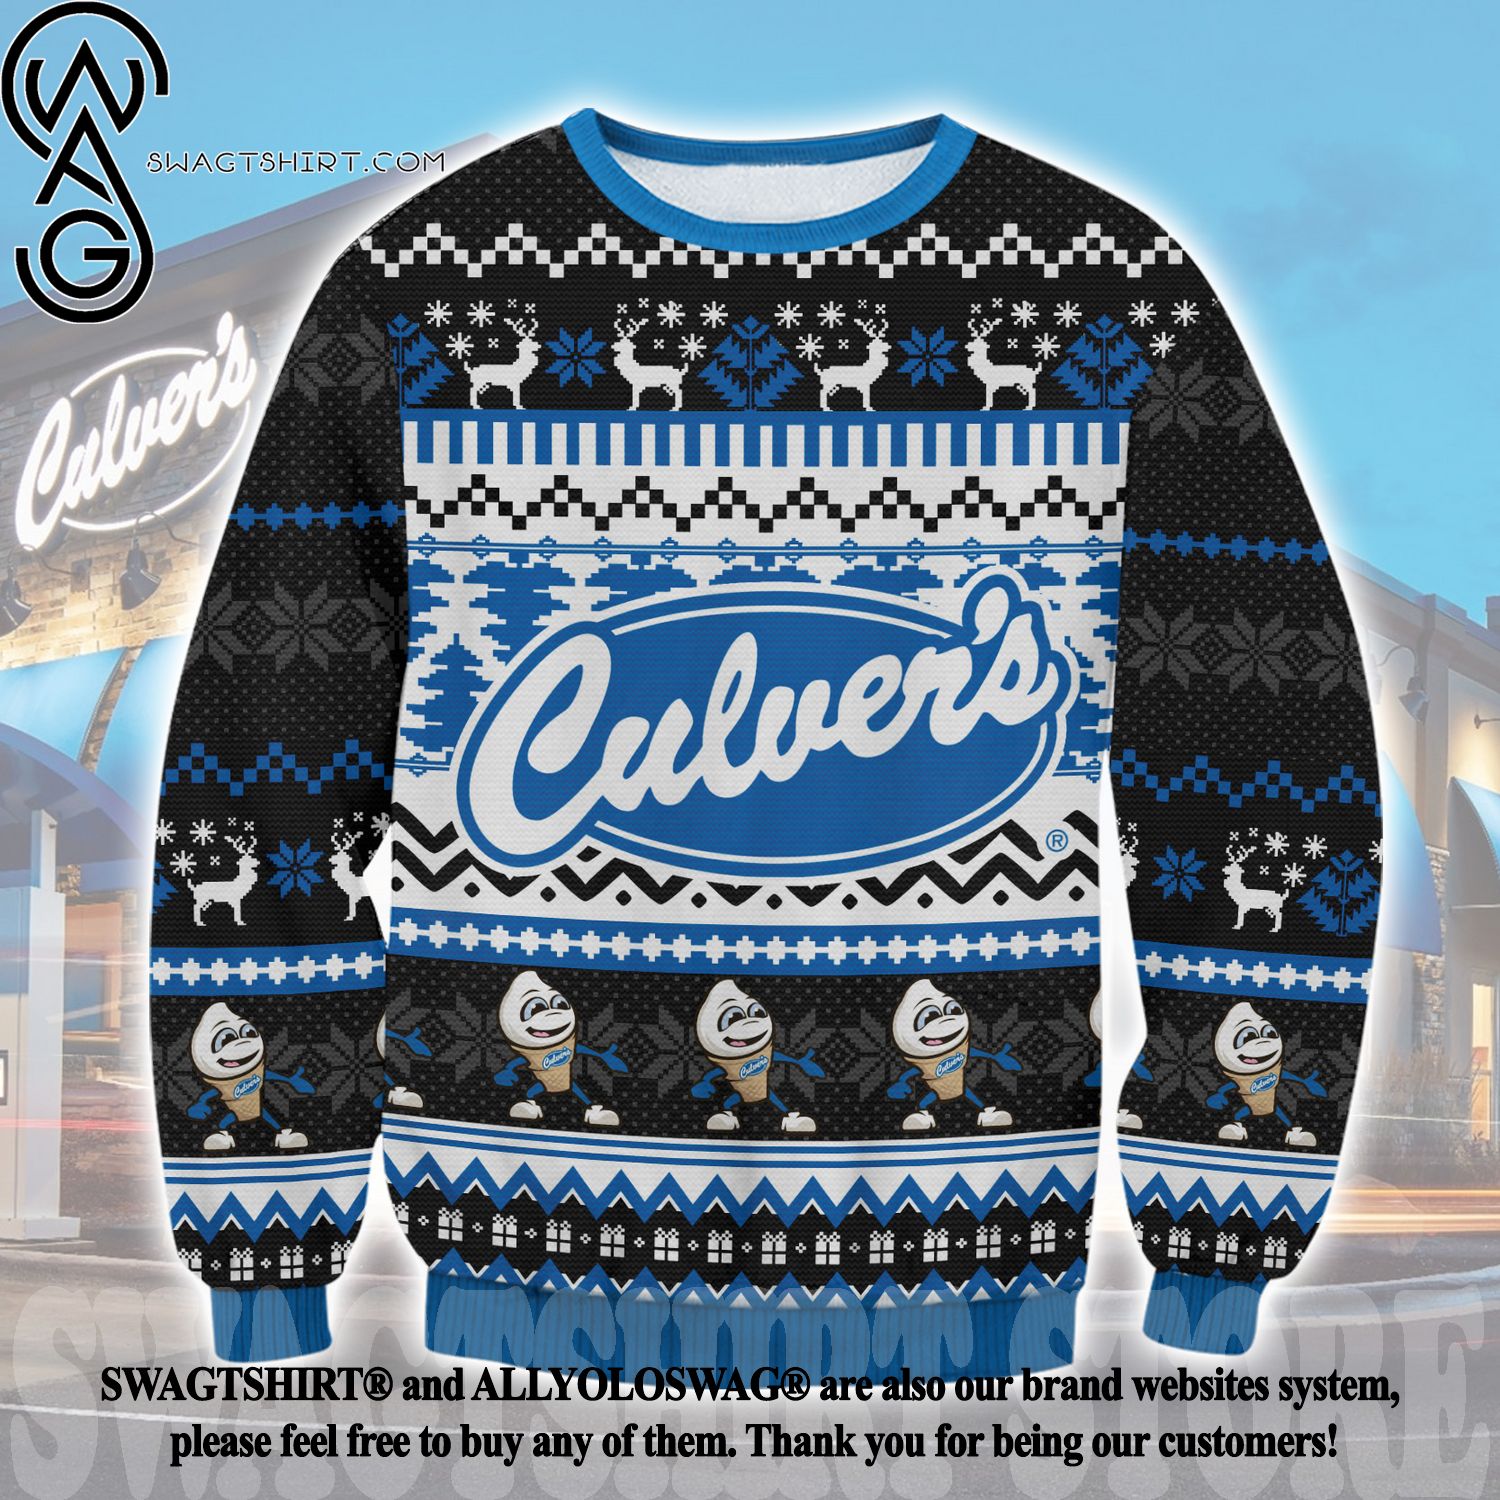 Best Selling Product] Culver's Ugly Christmas Holiday Sweater